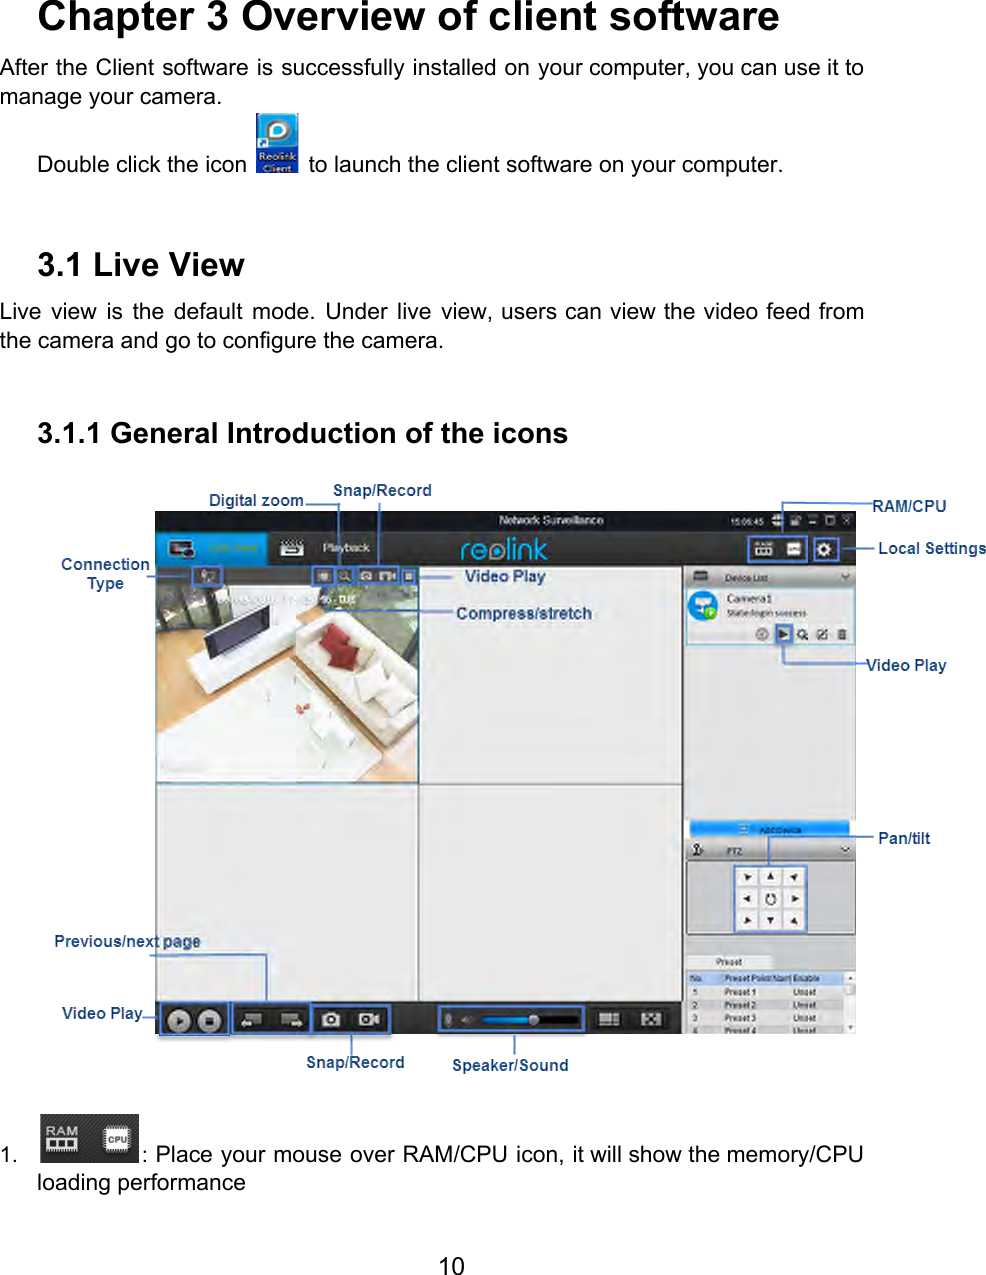     Chapter 3 Overview of client software After the Client software is successfully installed on your computer, you can use it to                             manage your camera. Double click the icon   to launch the client software on your computer.   3.1 Live View Live view is the default mode. Under live view, users can view the video feed from                               the camera and go to configure the camera.  3.1.1 General Introduction of the icons  1. : Place your mouse over RAM/CPU icon, it will show the memory/CPU                      loading performance 10  